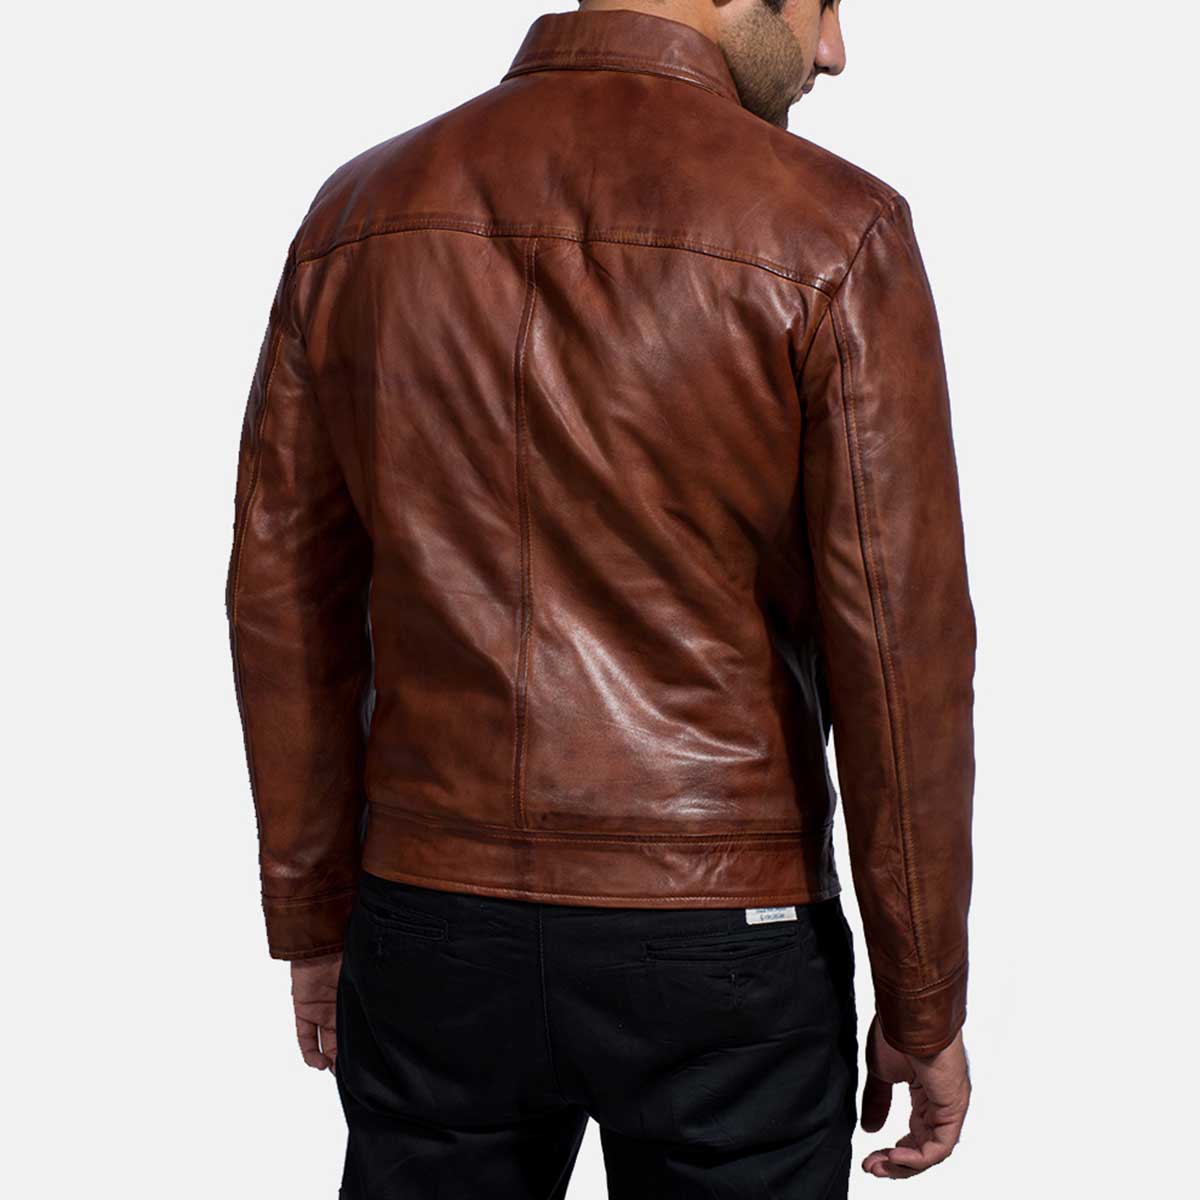 Brown Leather Inferno Jacket For Men - The Vintage Leather